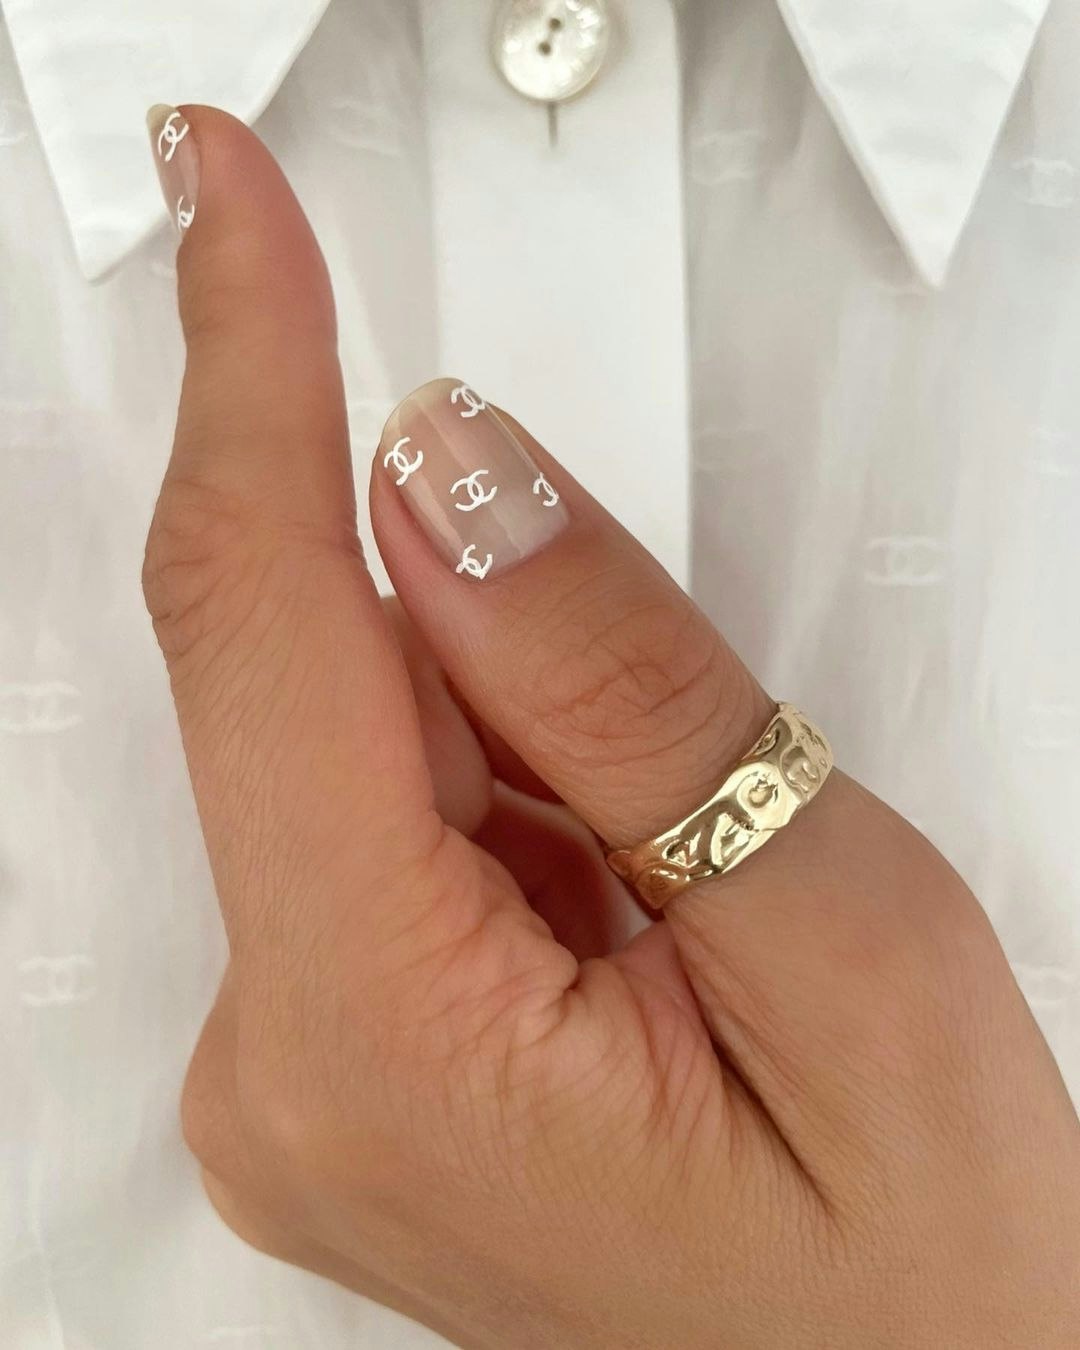 Logo Nails Are Our Latest Mani Obsession— And Now They'll Be